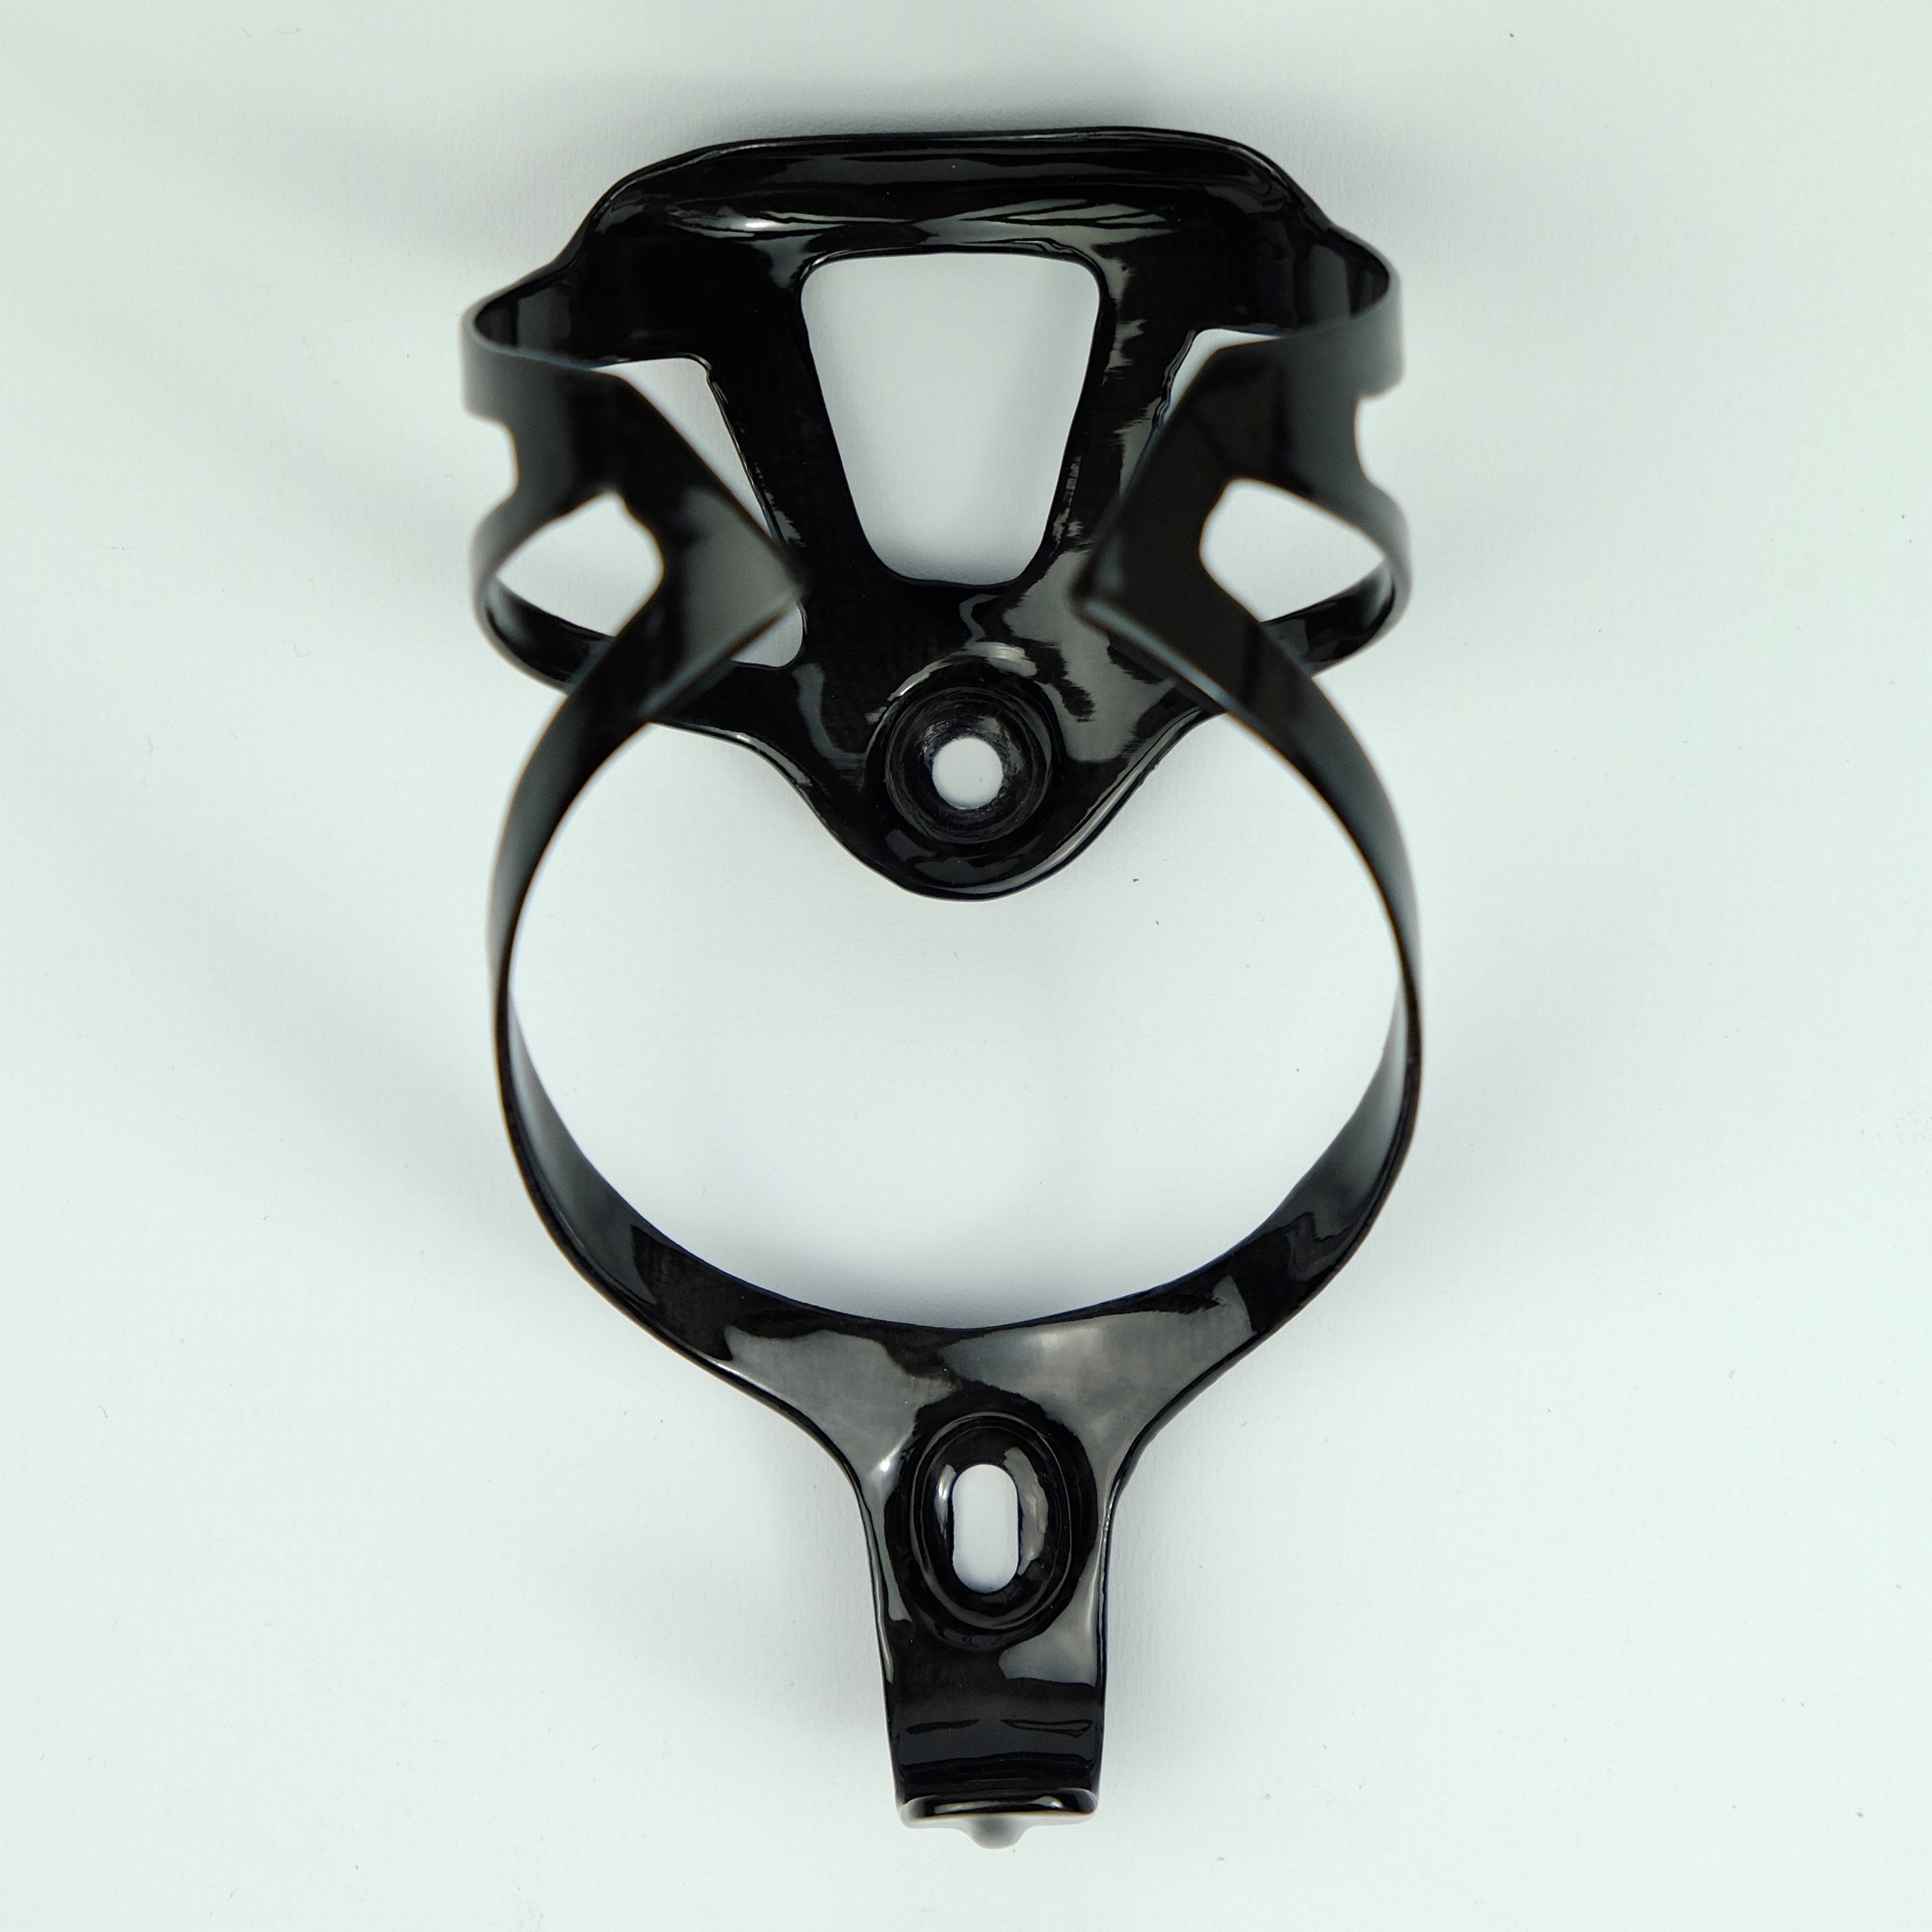 Pair of Carbon Bottle Rib Cages (Add On)